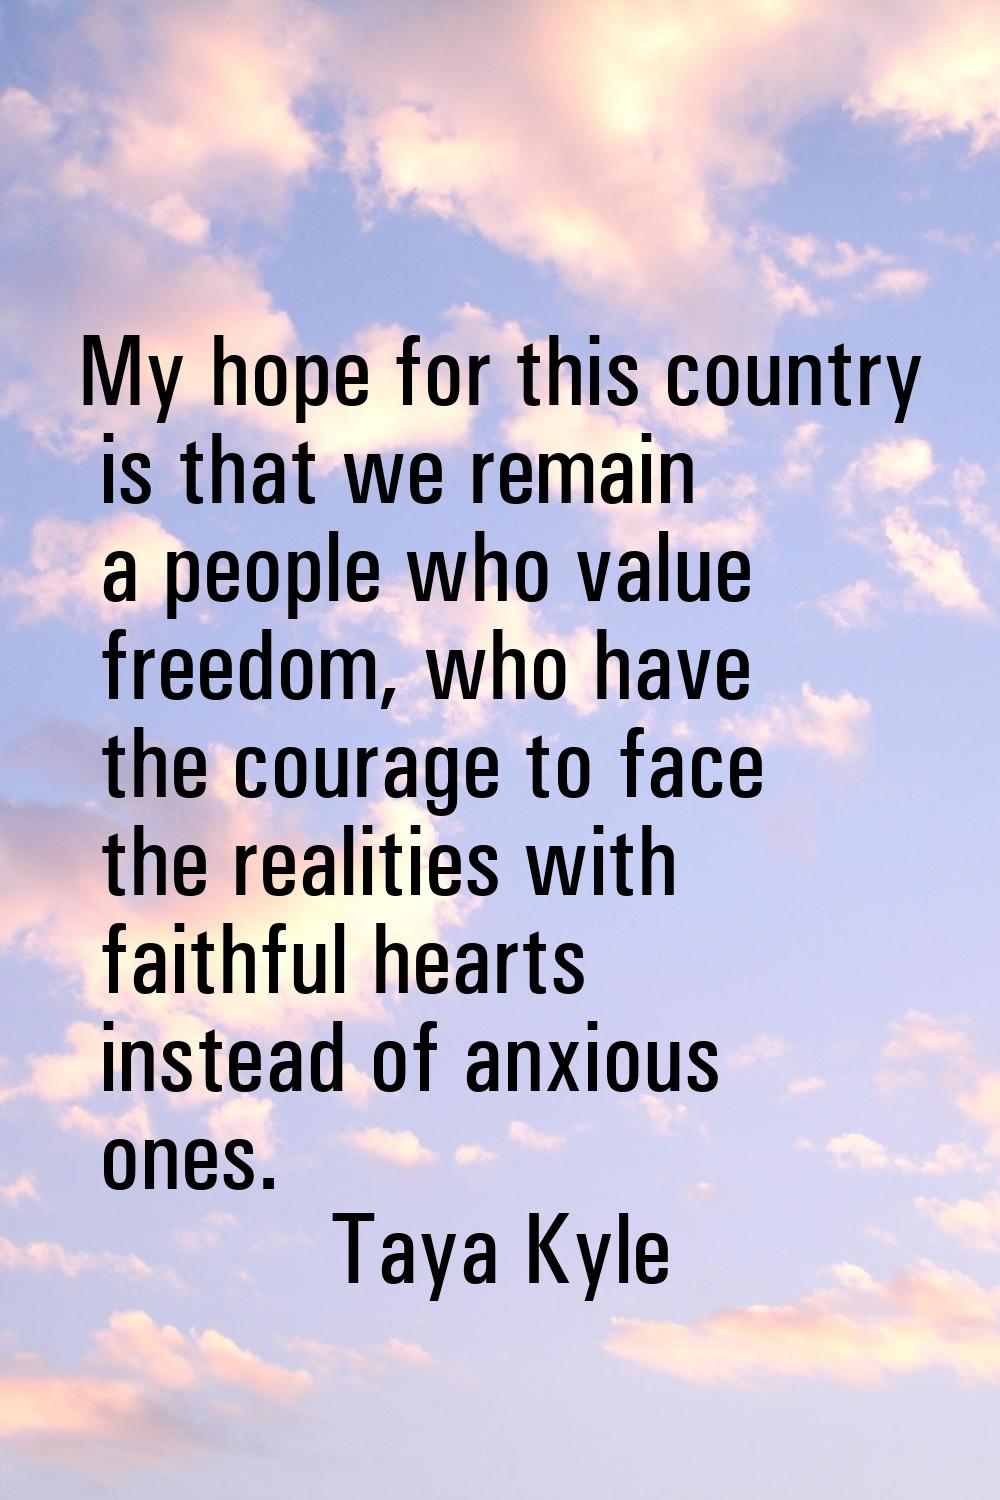 My hope for this country is that we remain a people who value freedom, who have the courage to face